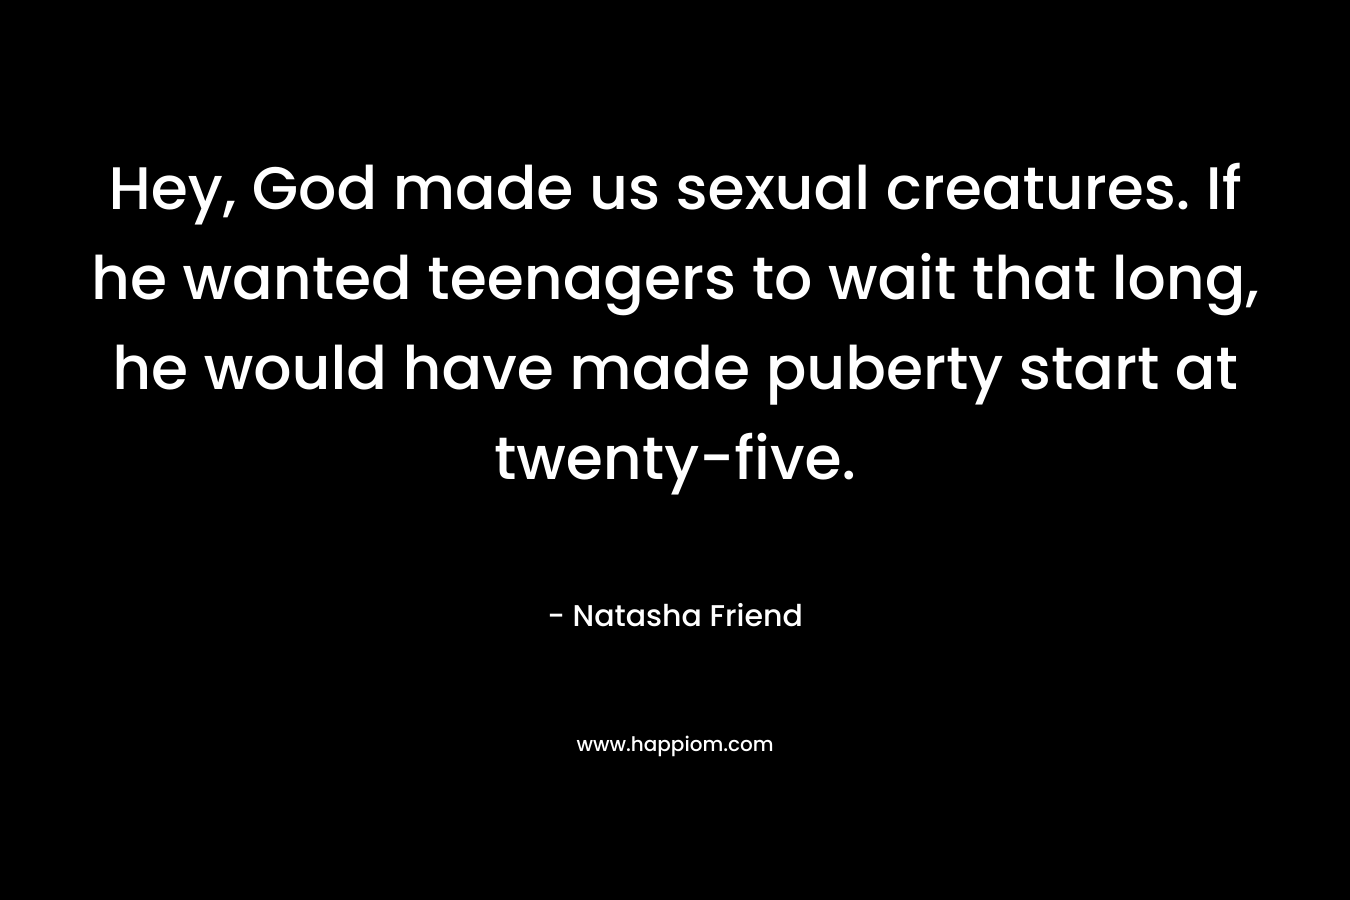 Hey, God made us sexual creatures. If he wanted teenagers to wait that long, he would have made puberty start at twenty-five.